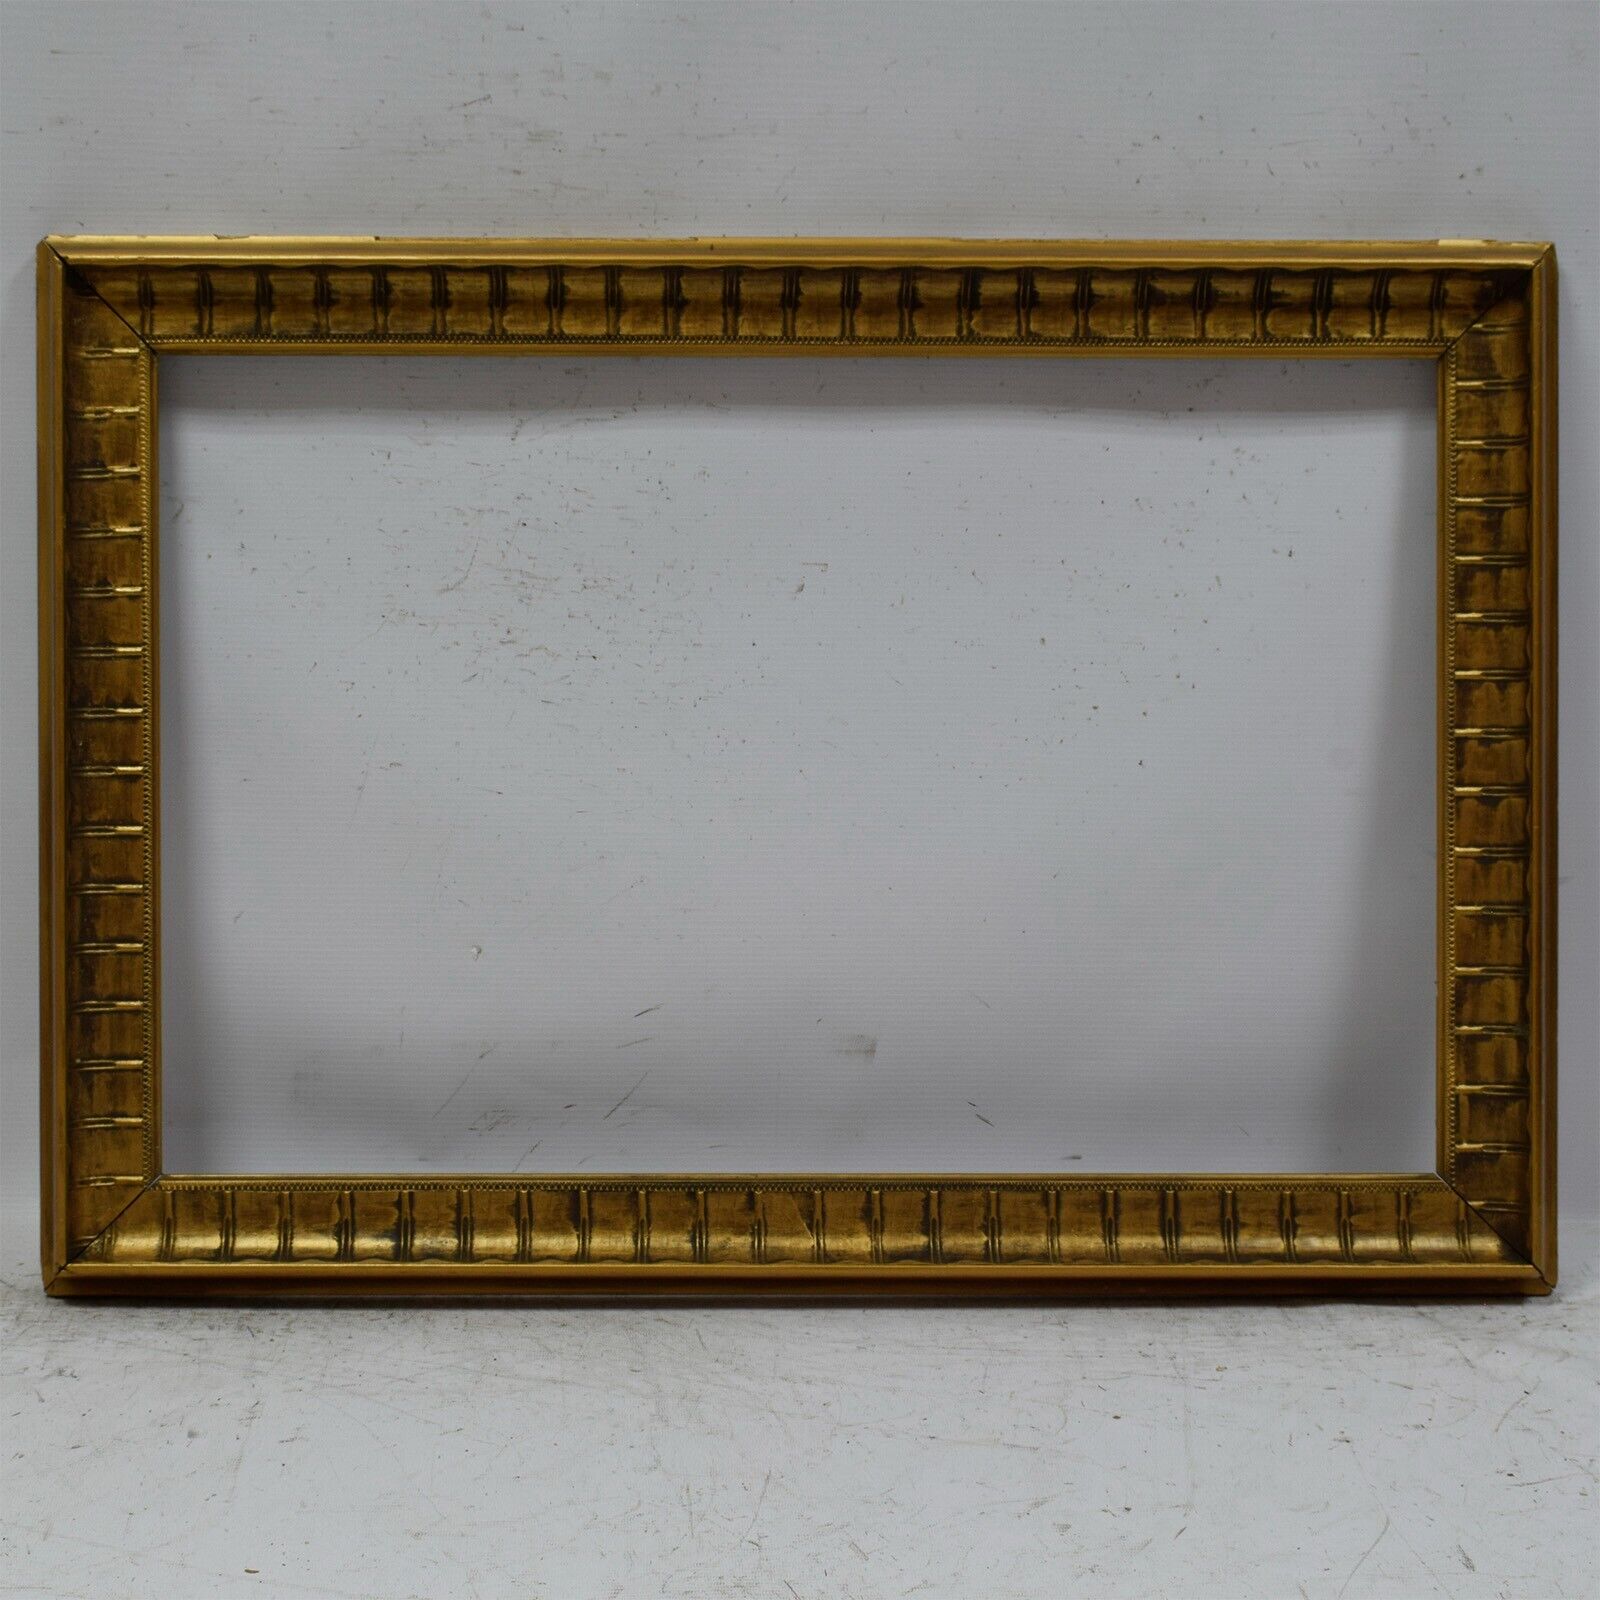 1st half of 20th cent old wooden painting frame dimensions: 27.7 x 17.9 in